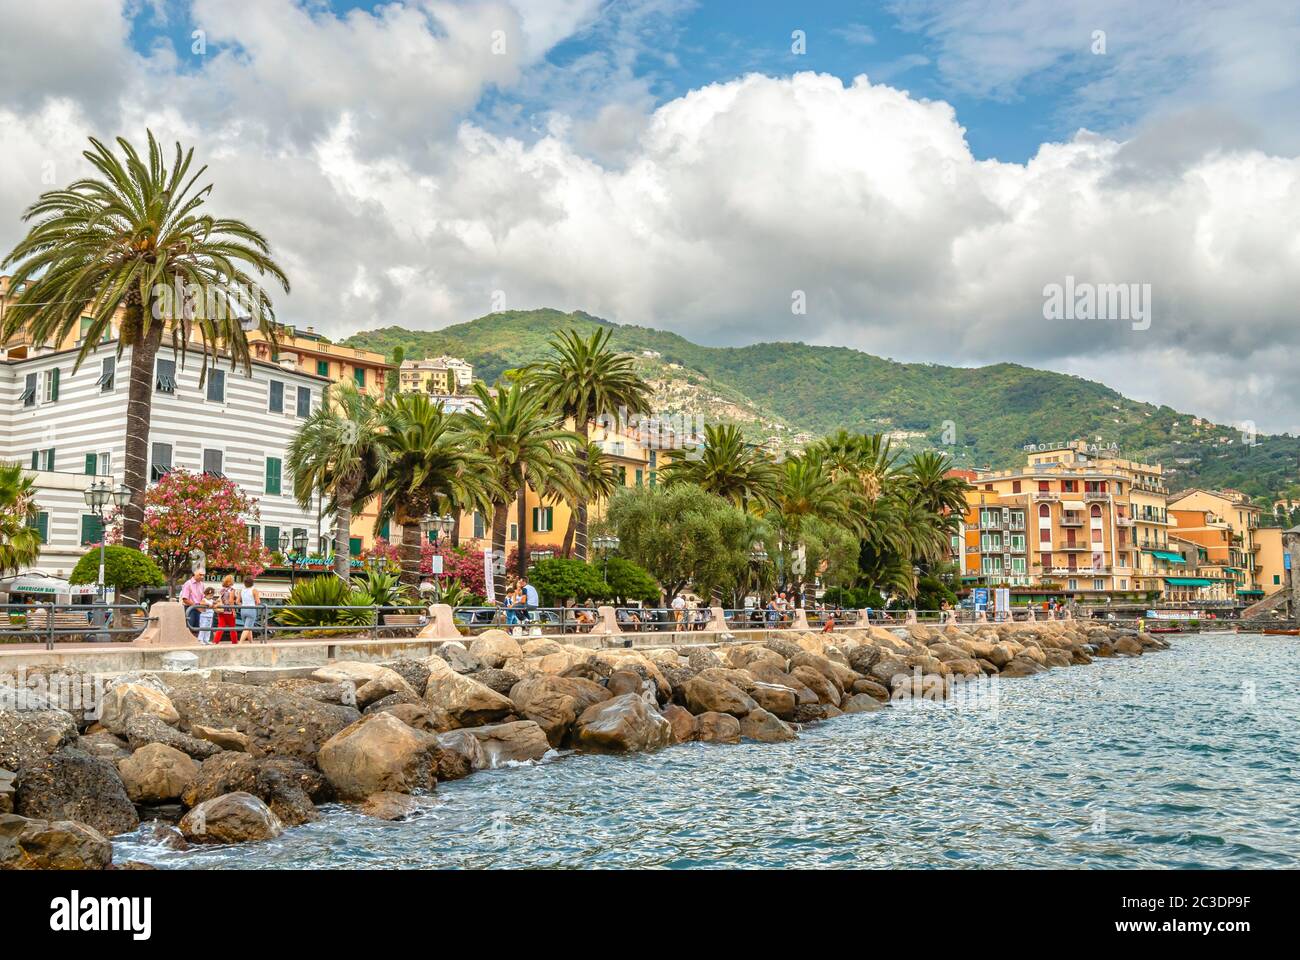 Old Town and harbor parade of Rapallo, Liguria, North West Italy Stock Photo